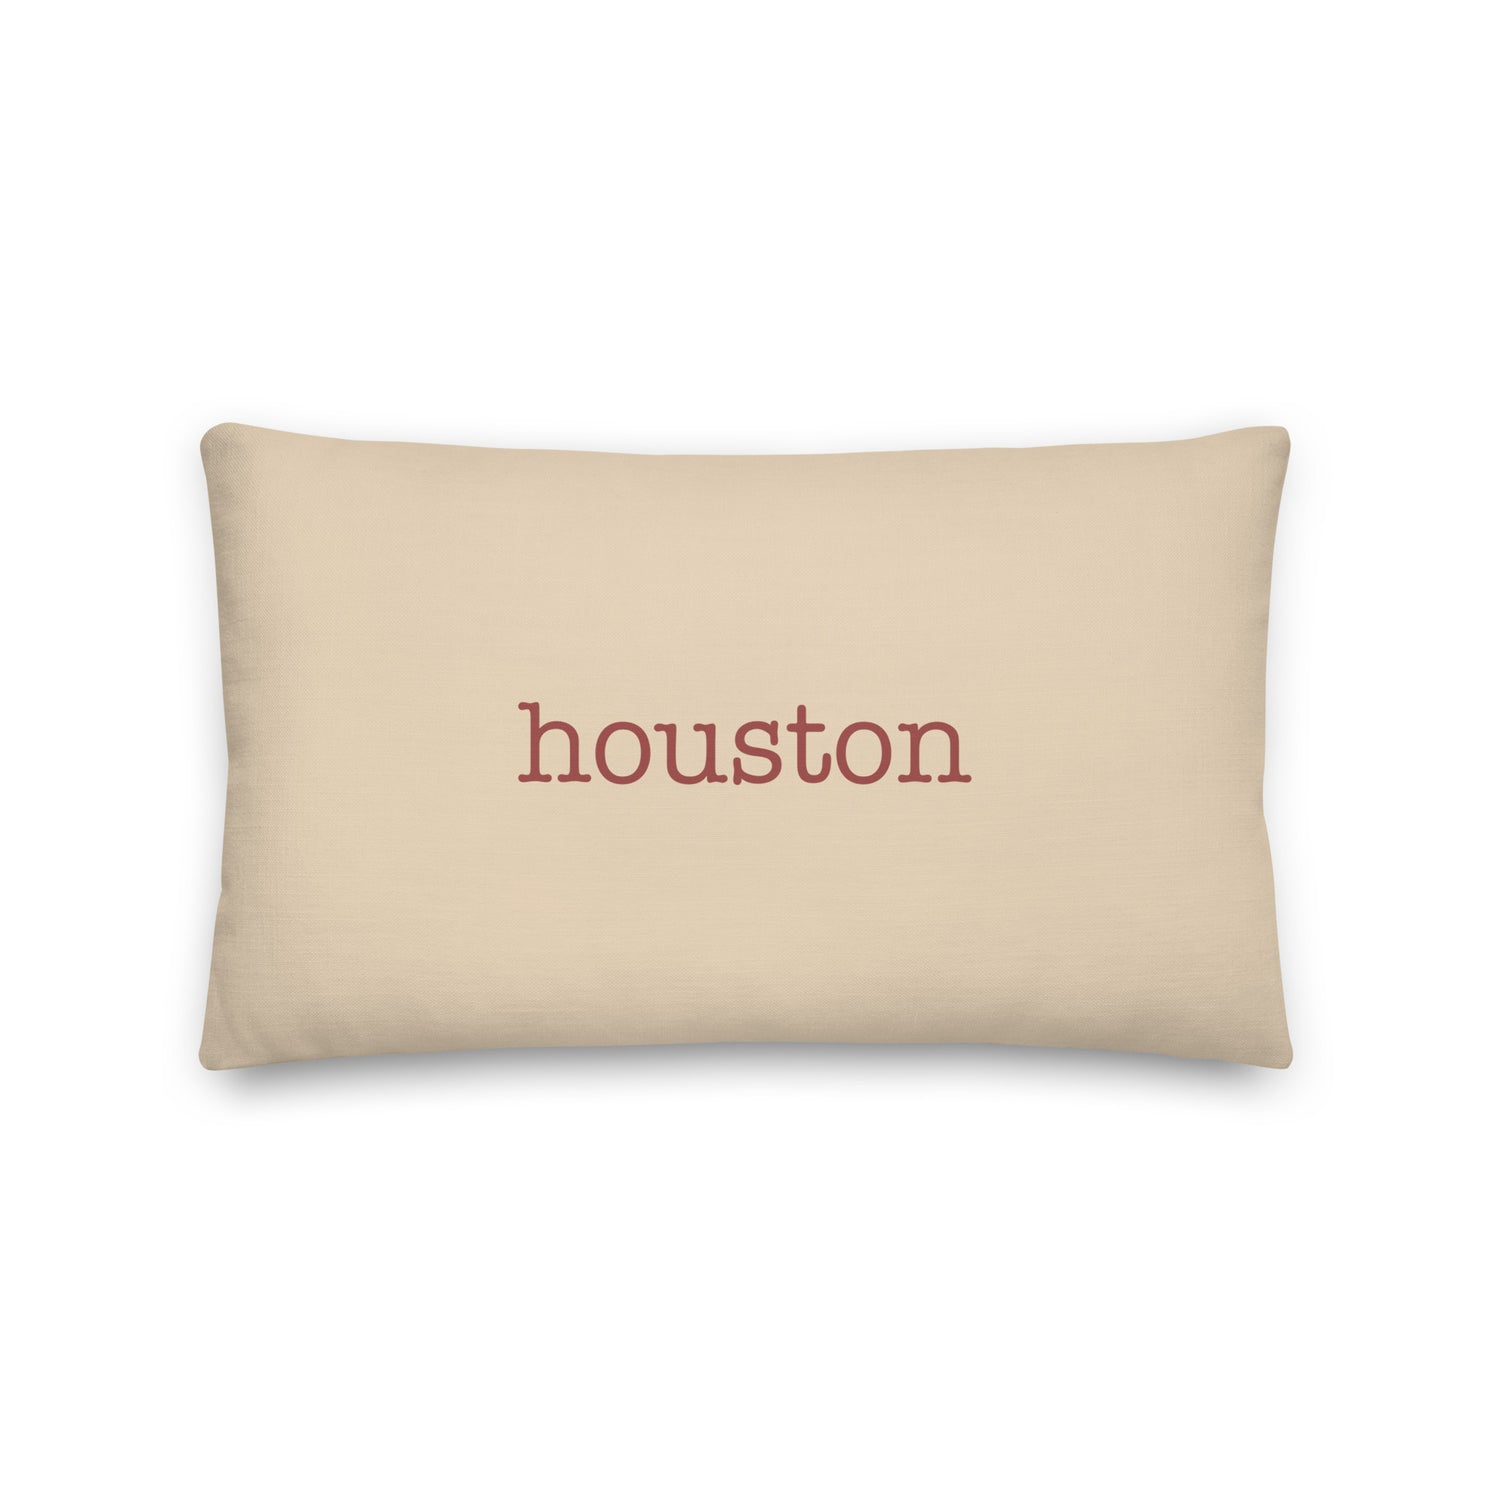 Houston Texas Pillows and Blankets • HOU Airport Code